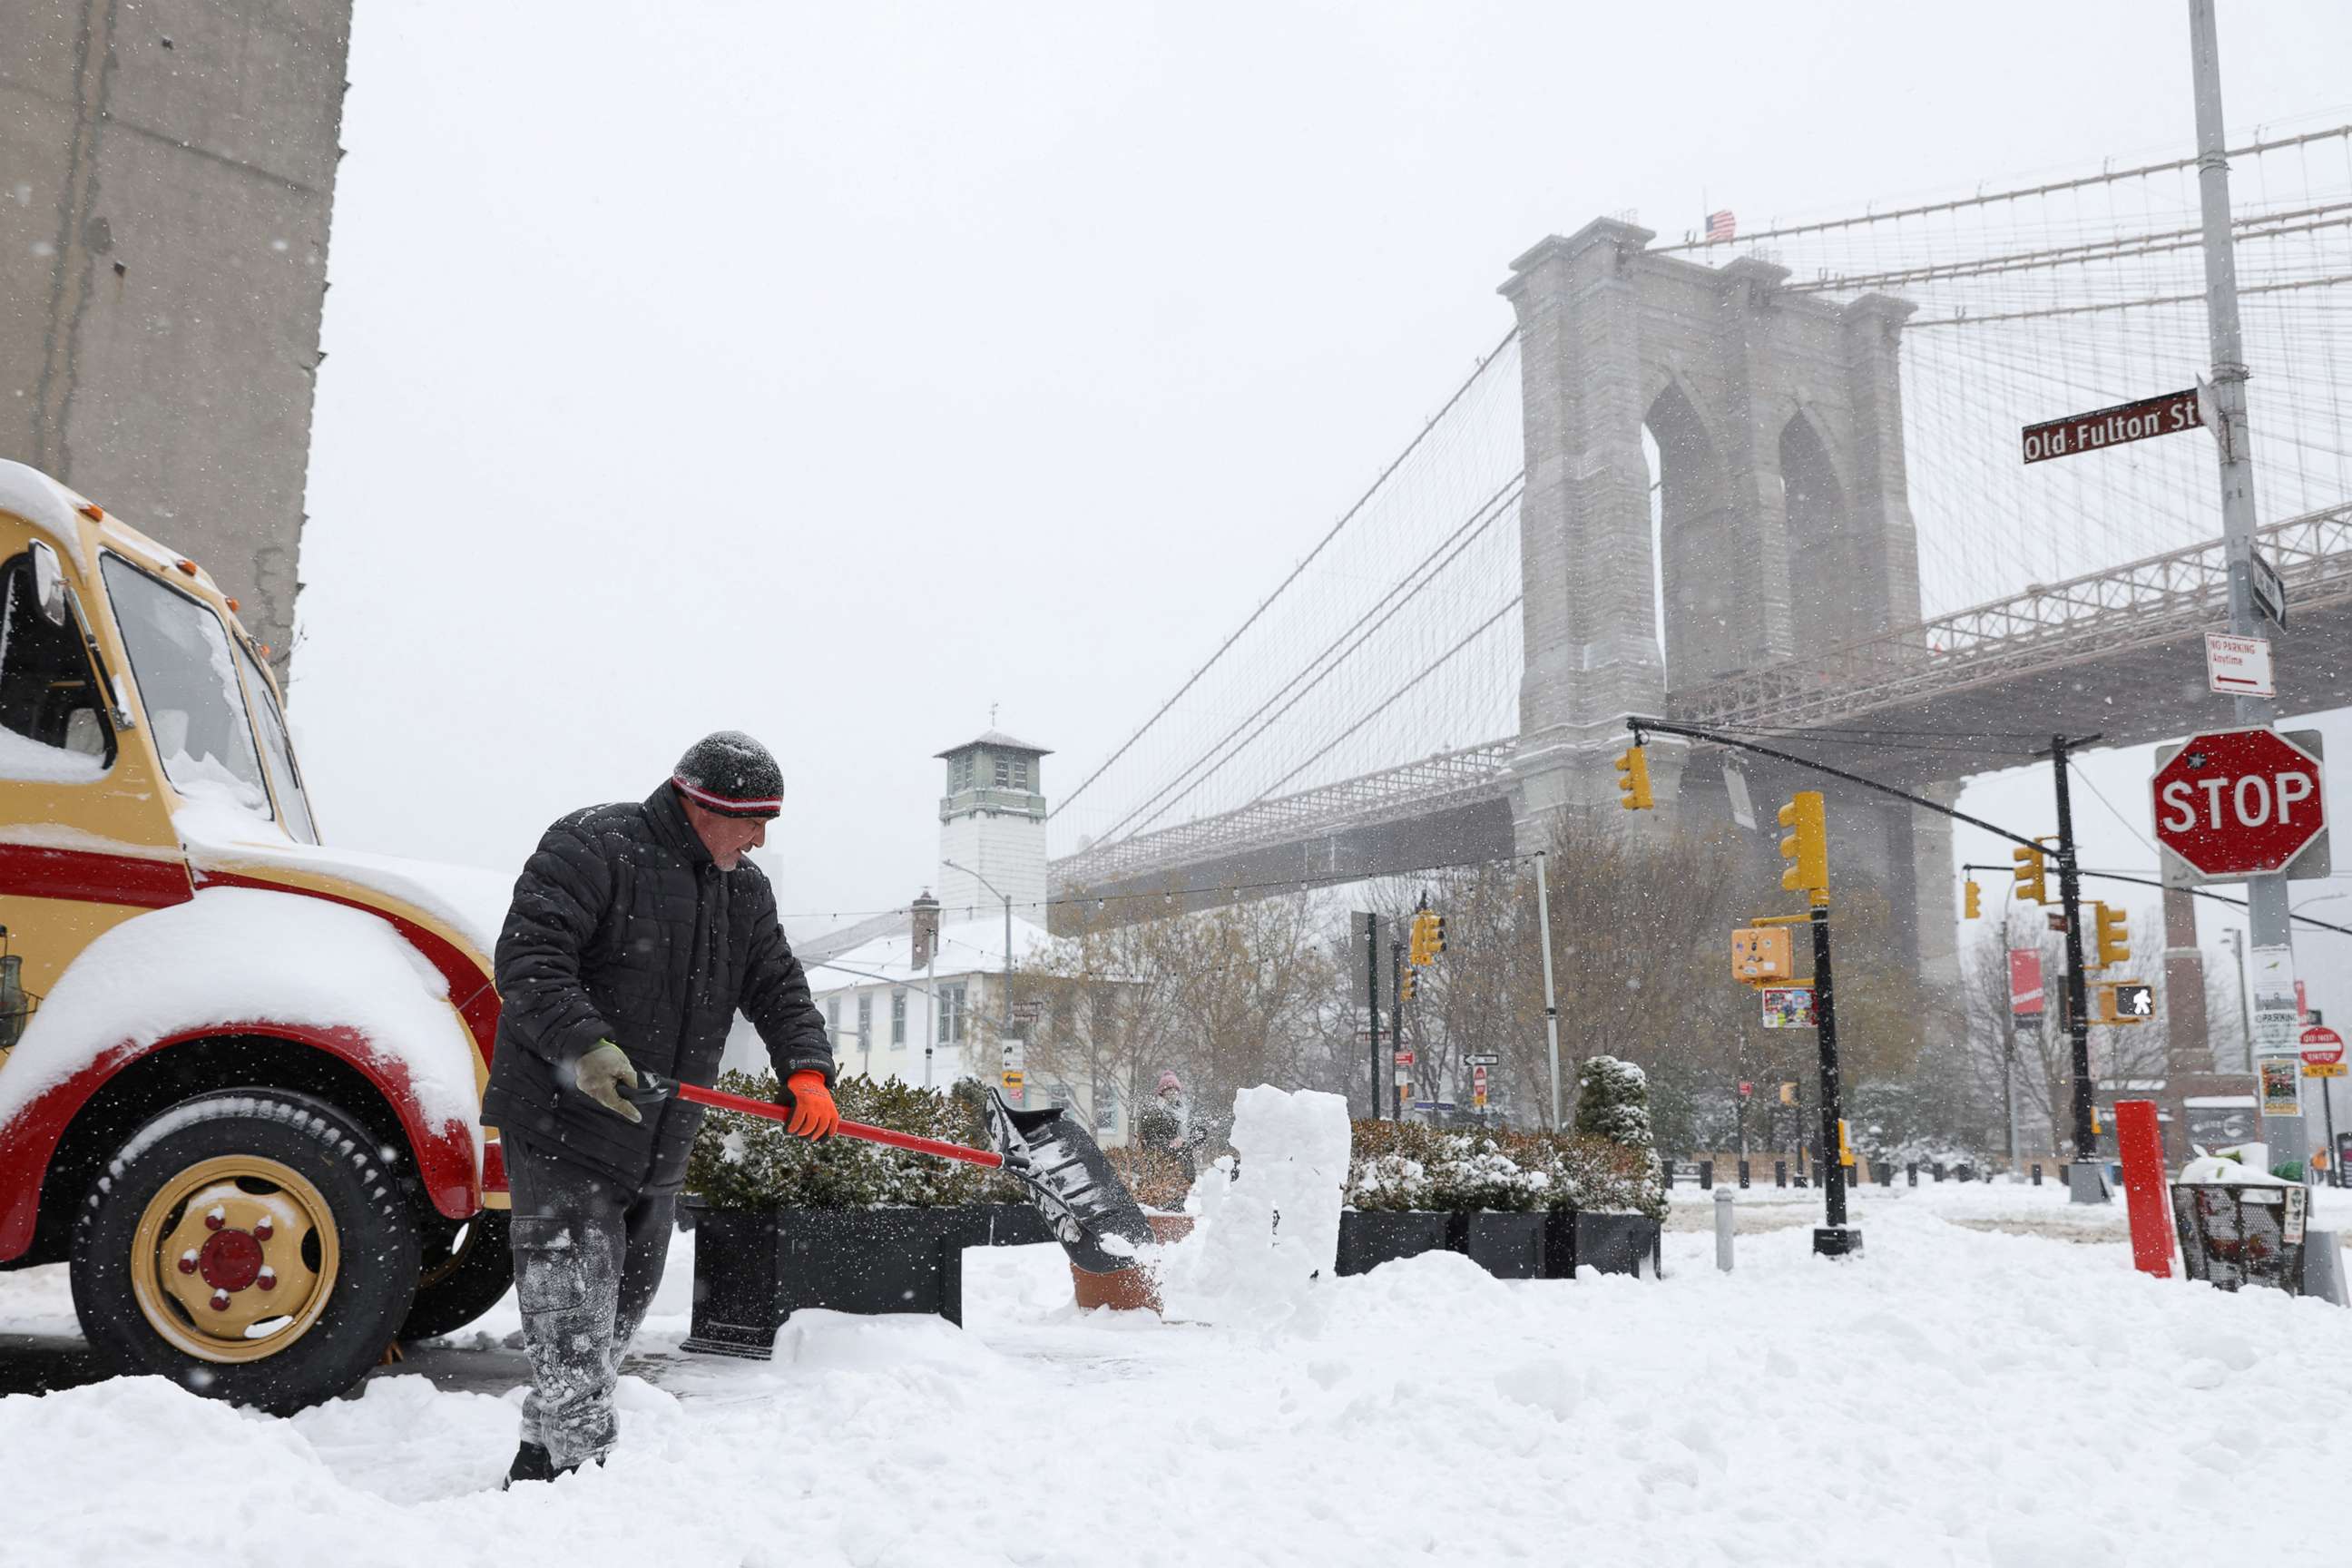 PHOTO: A person shovels snow during a Nor'easter storm in Brooklyn, N.Y., Jan. 29, 2022.